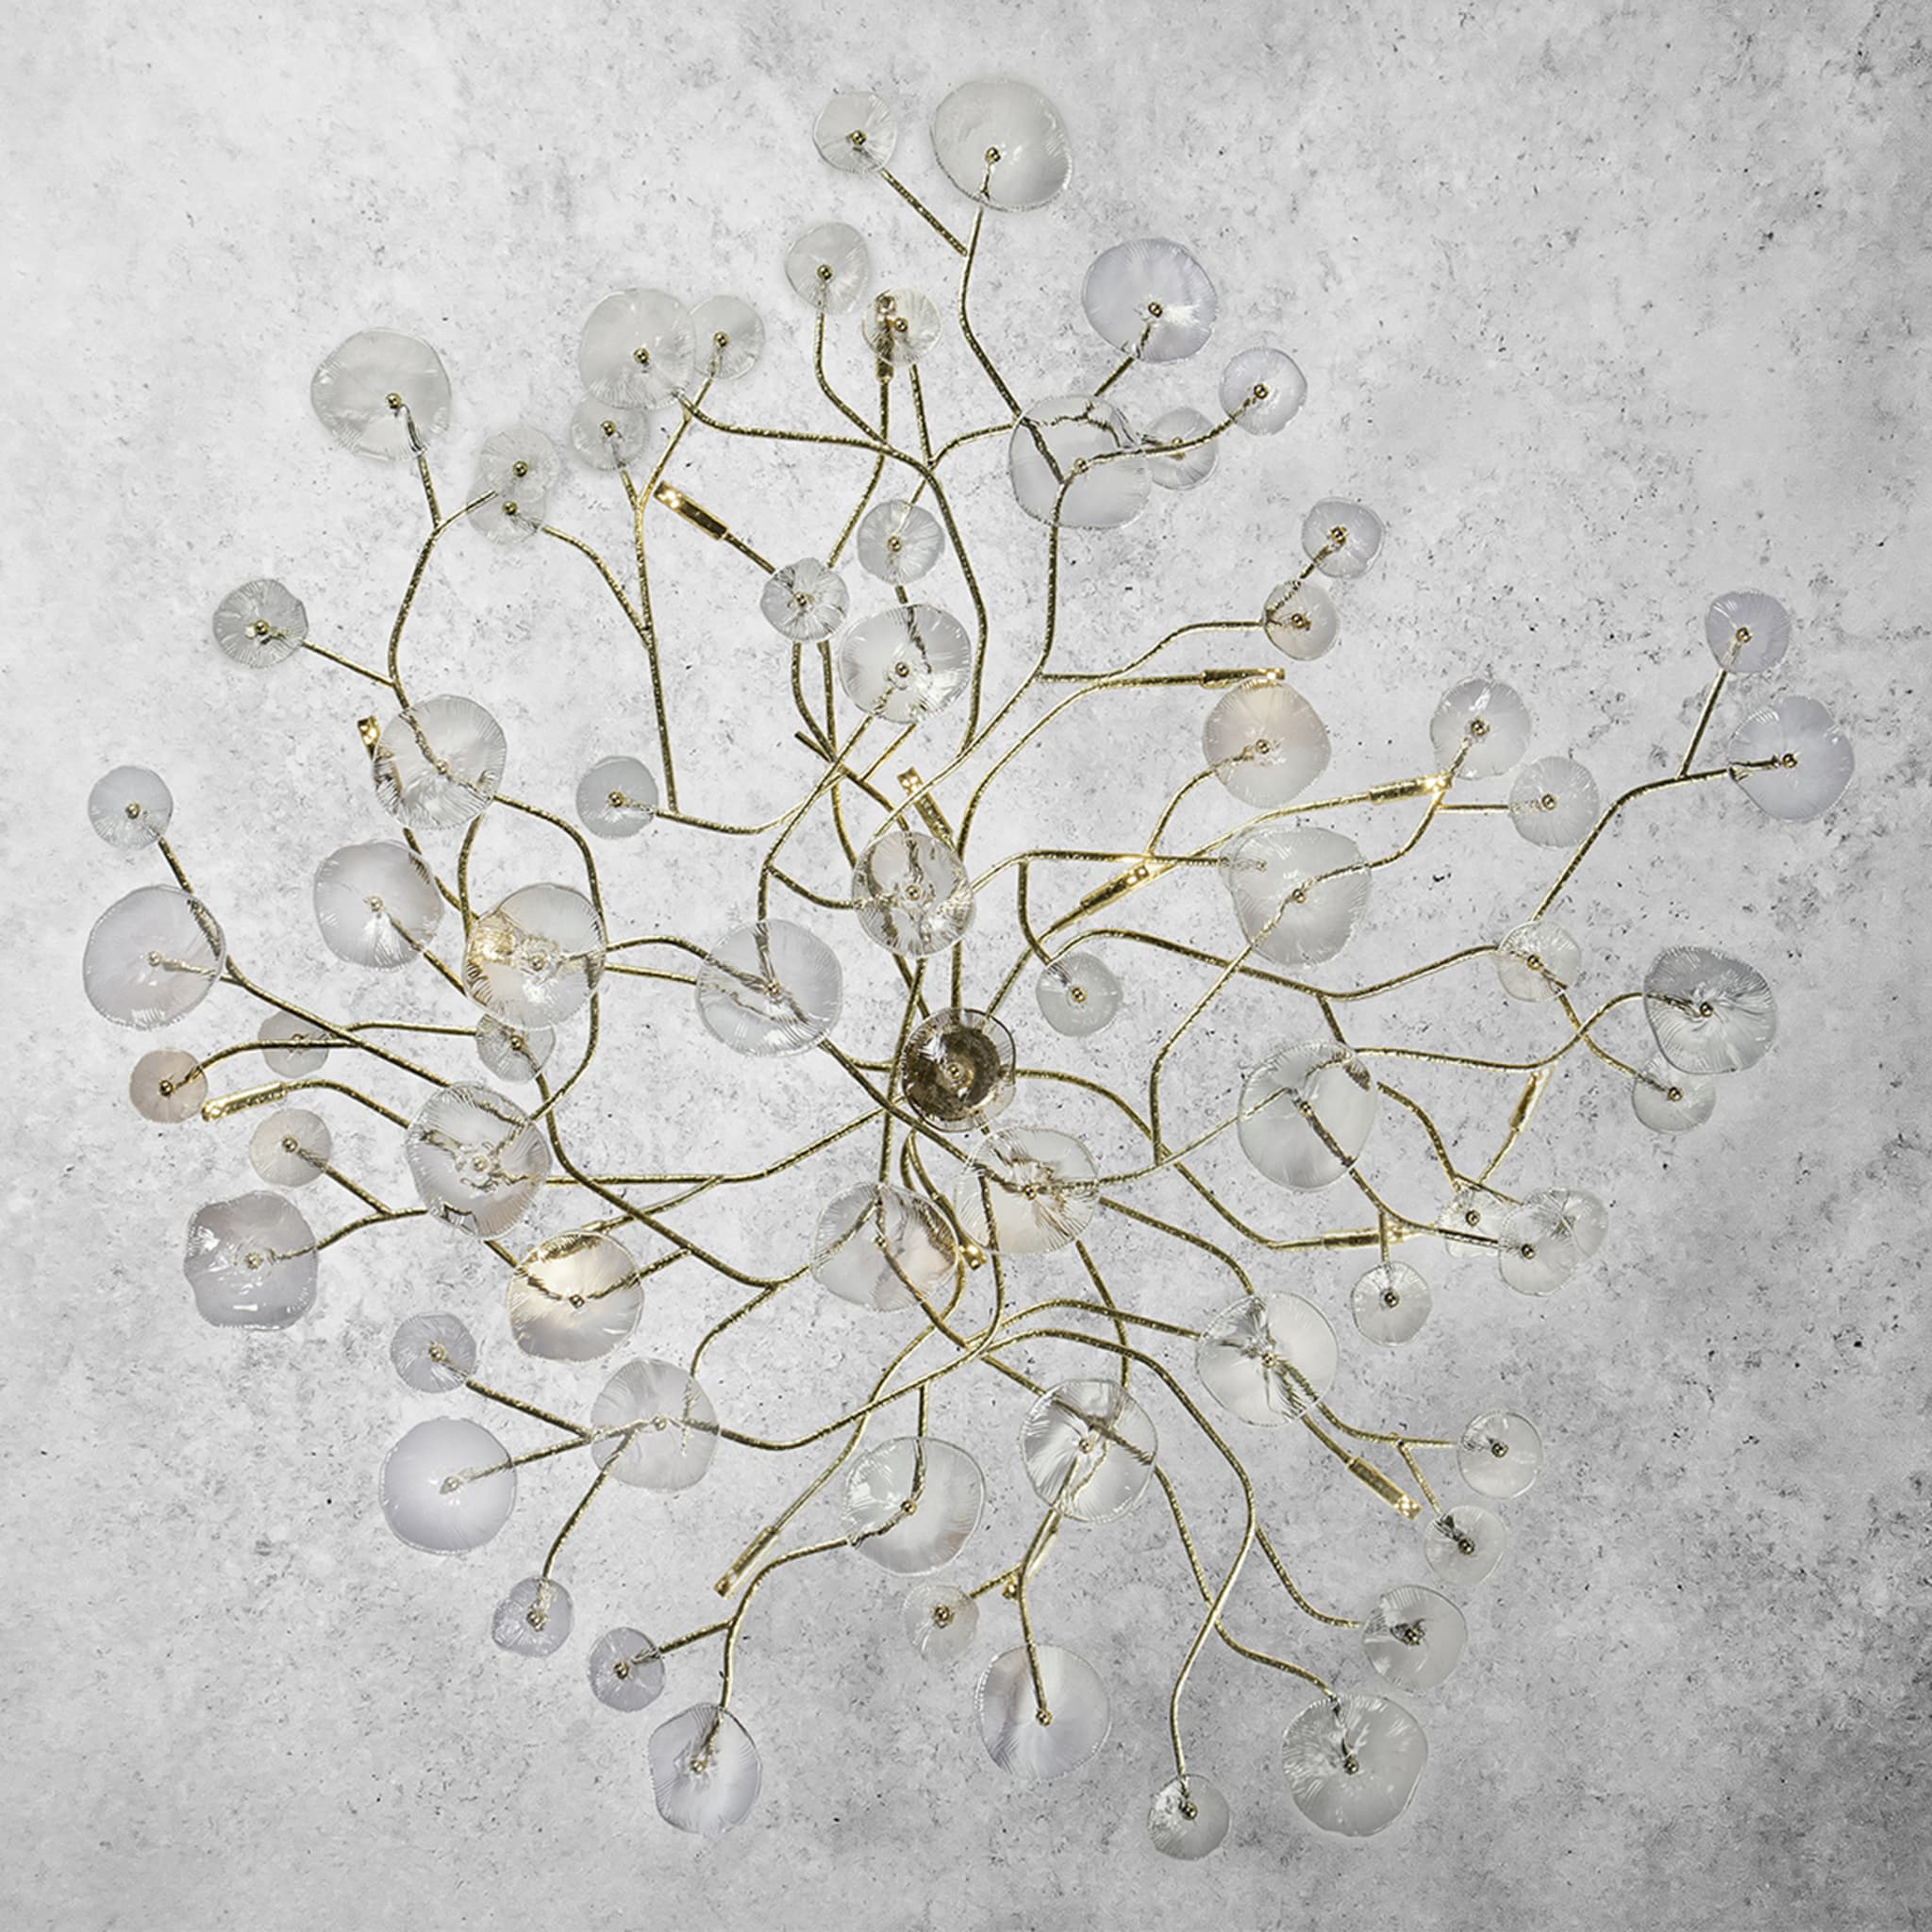 In Bloom Phytomorphic Ceiling Lamp #1 - Alternative view 1